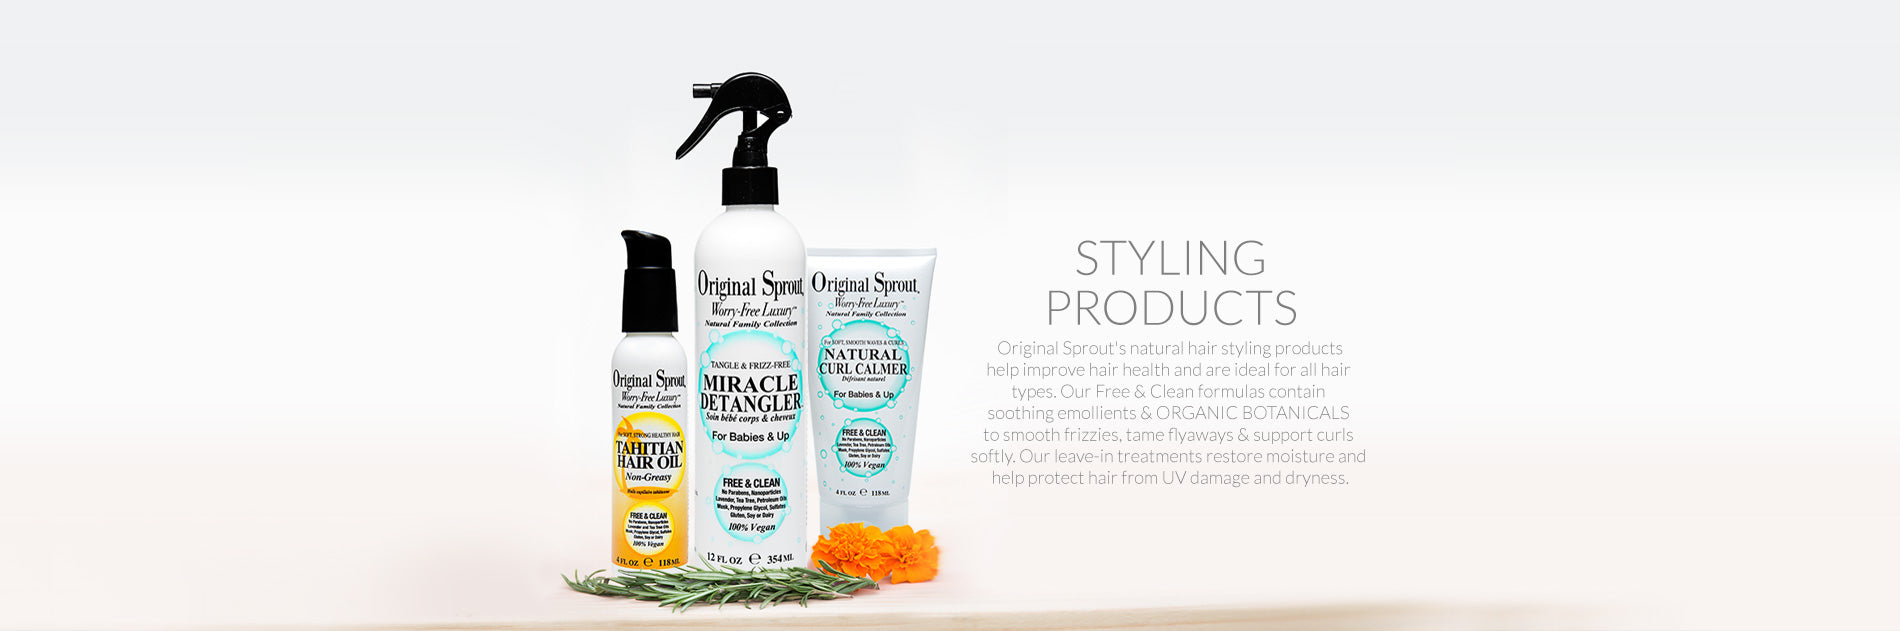 styling products